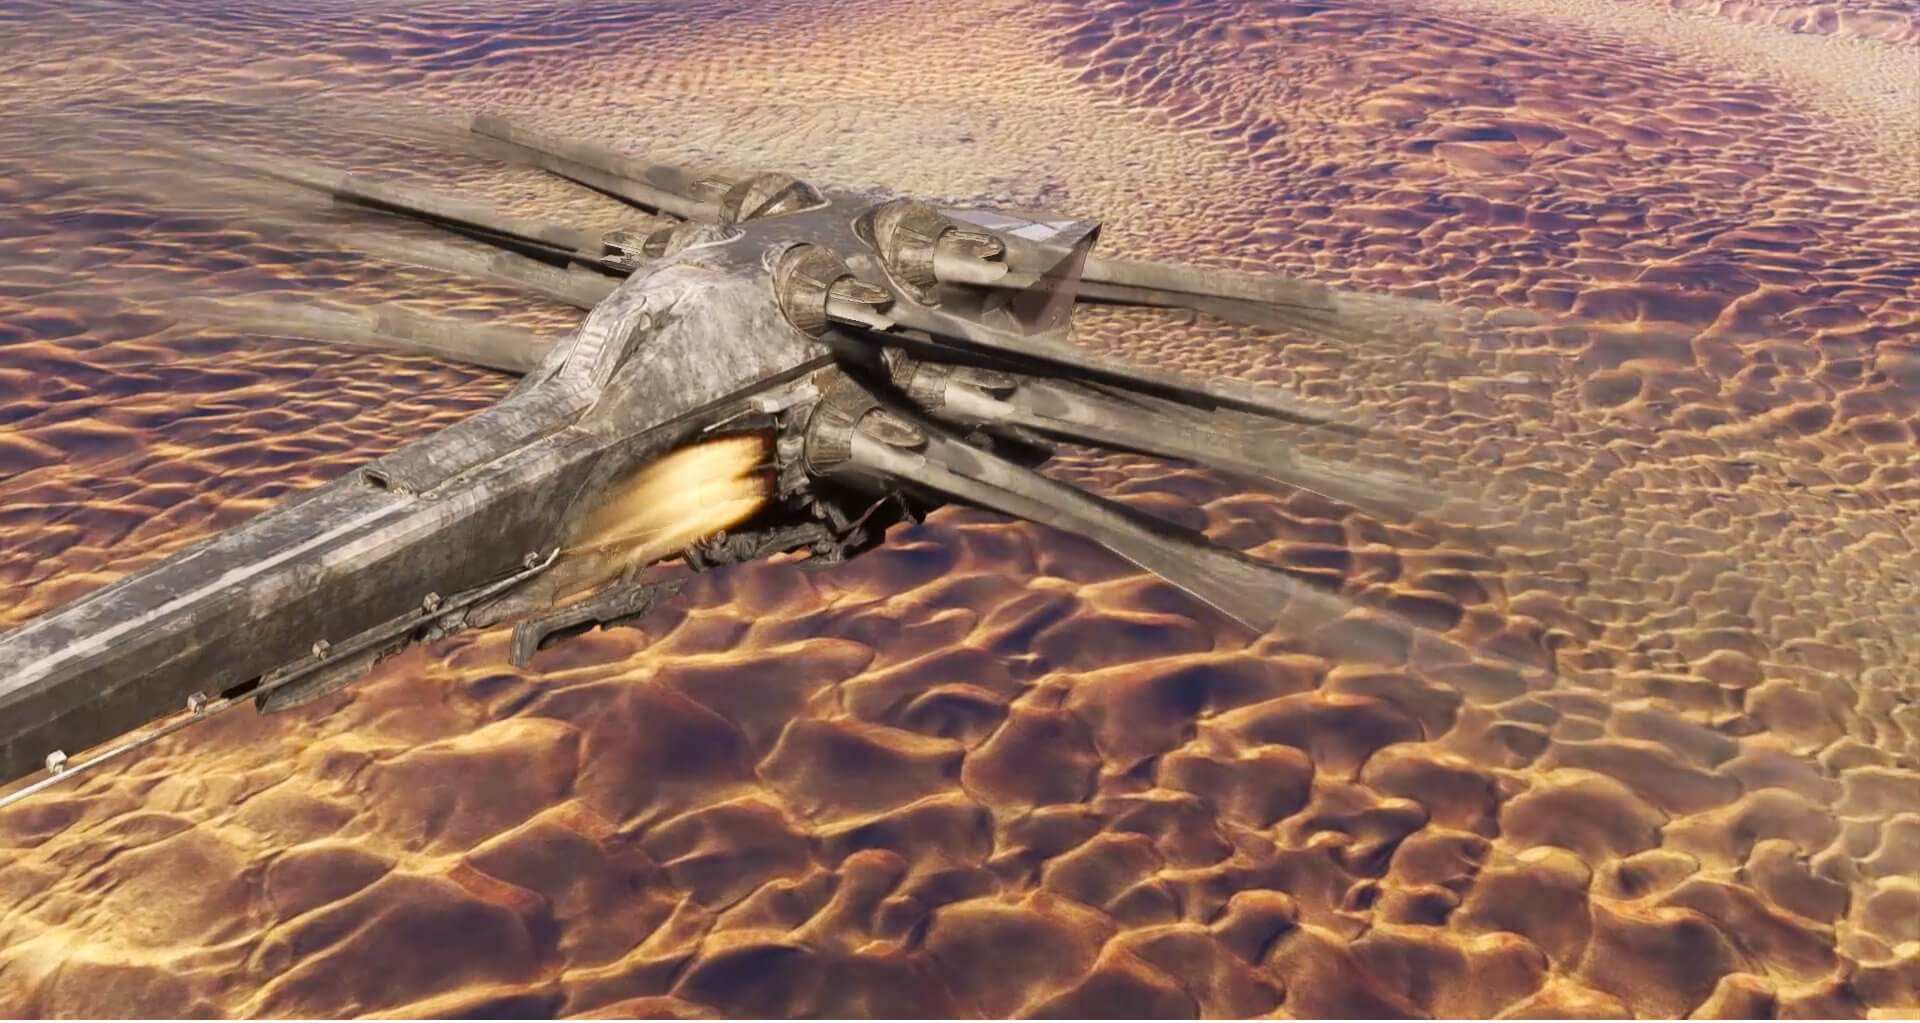 The Ornithopter flies with afterburners engaged and wings flapping above the desert.